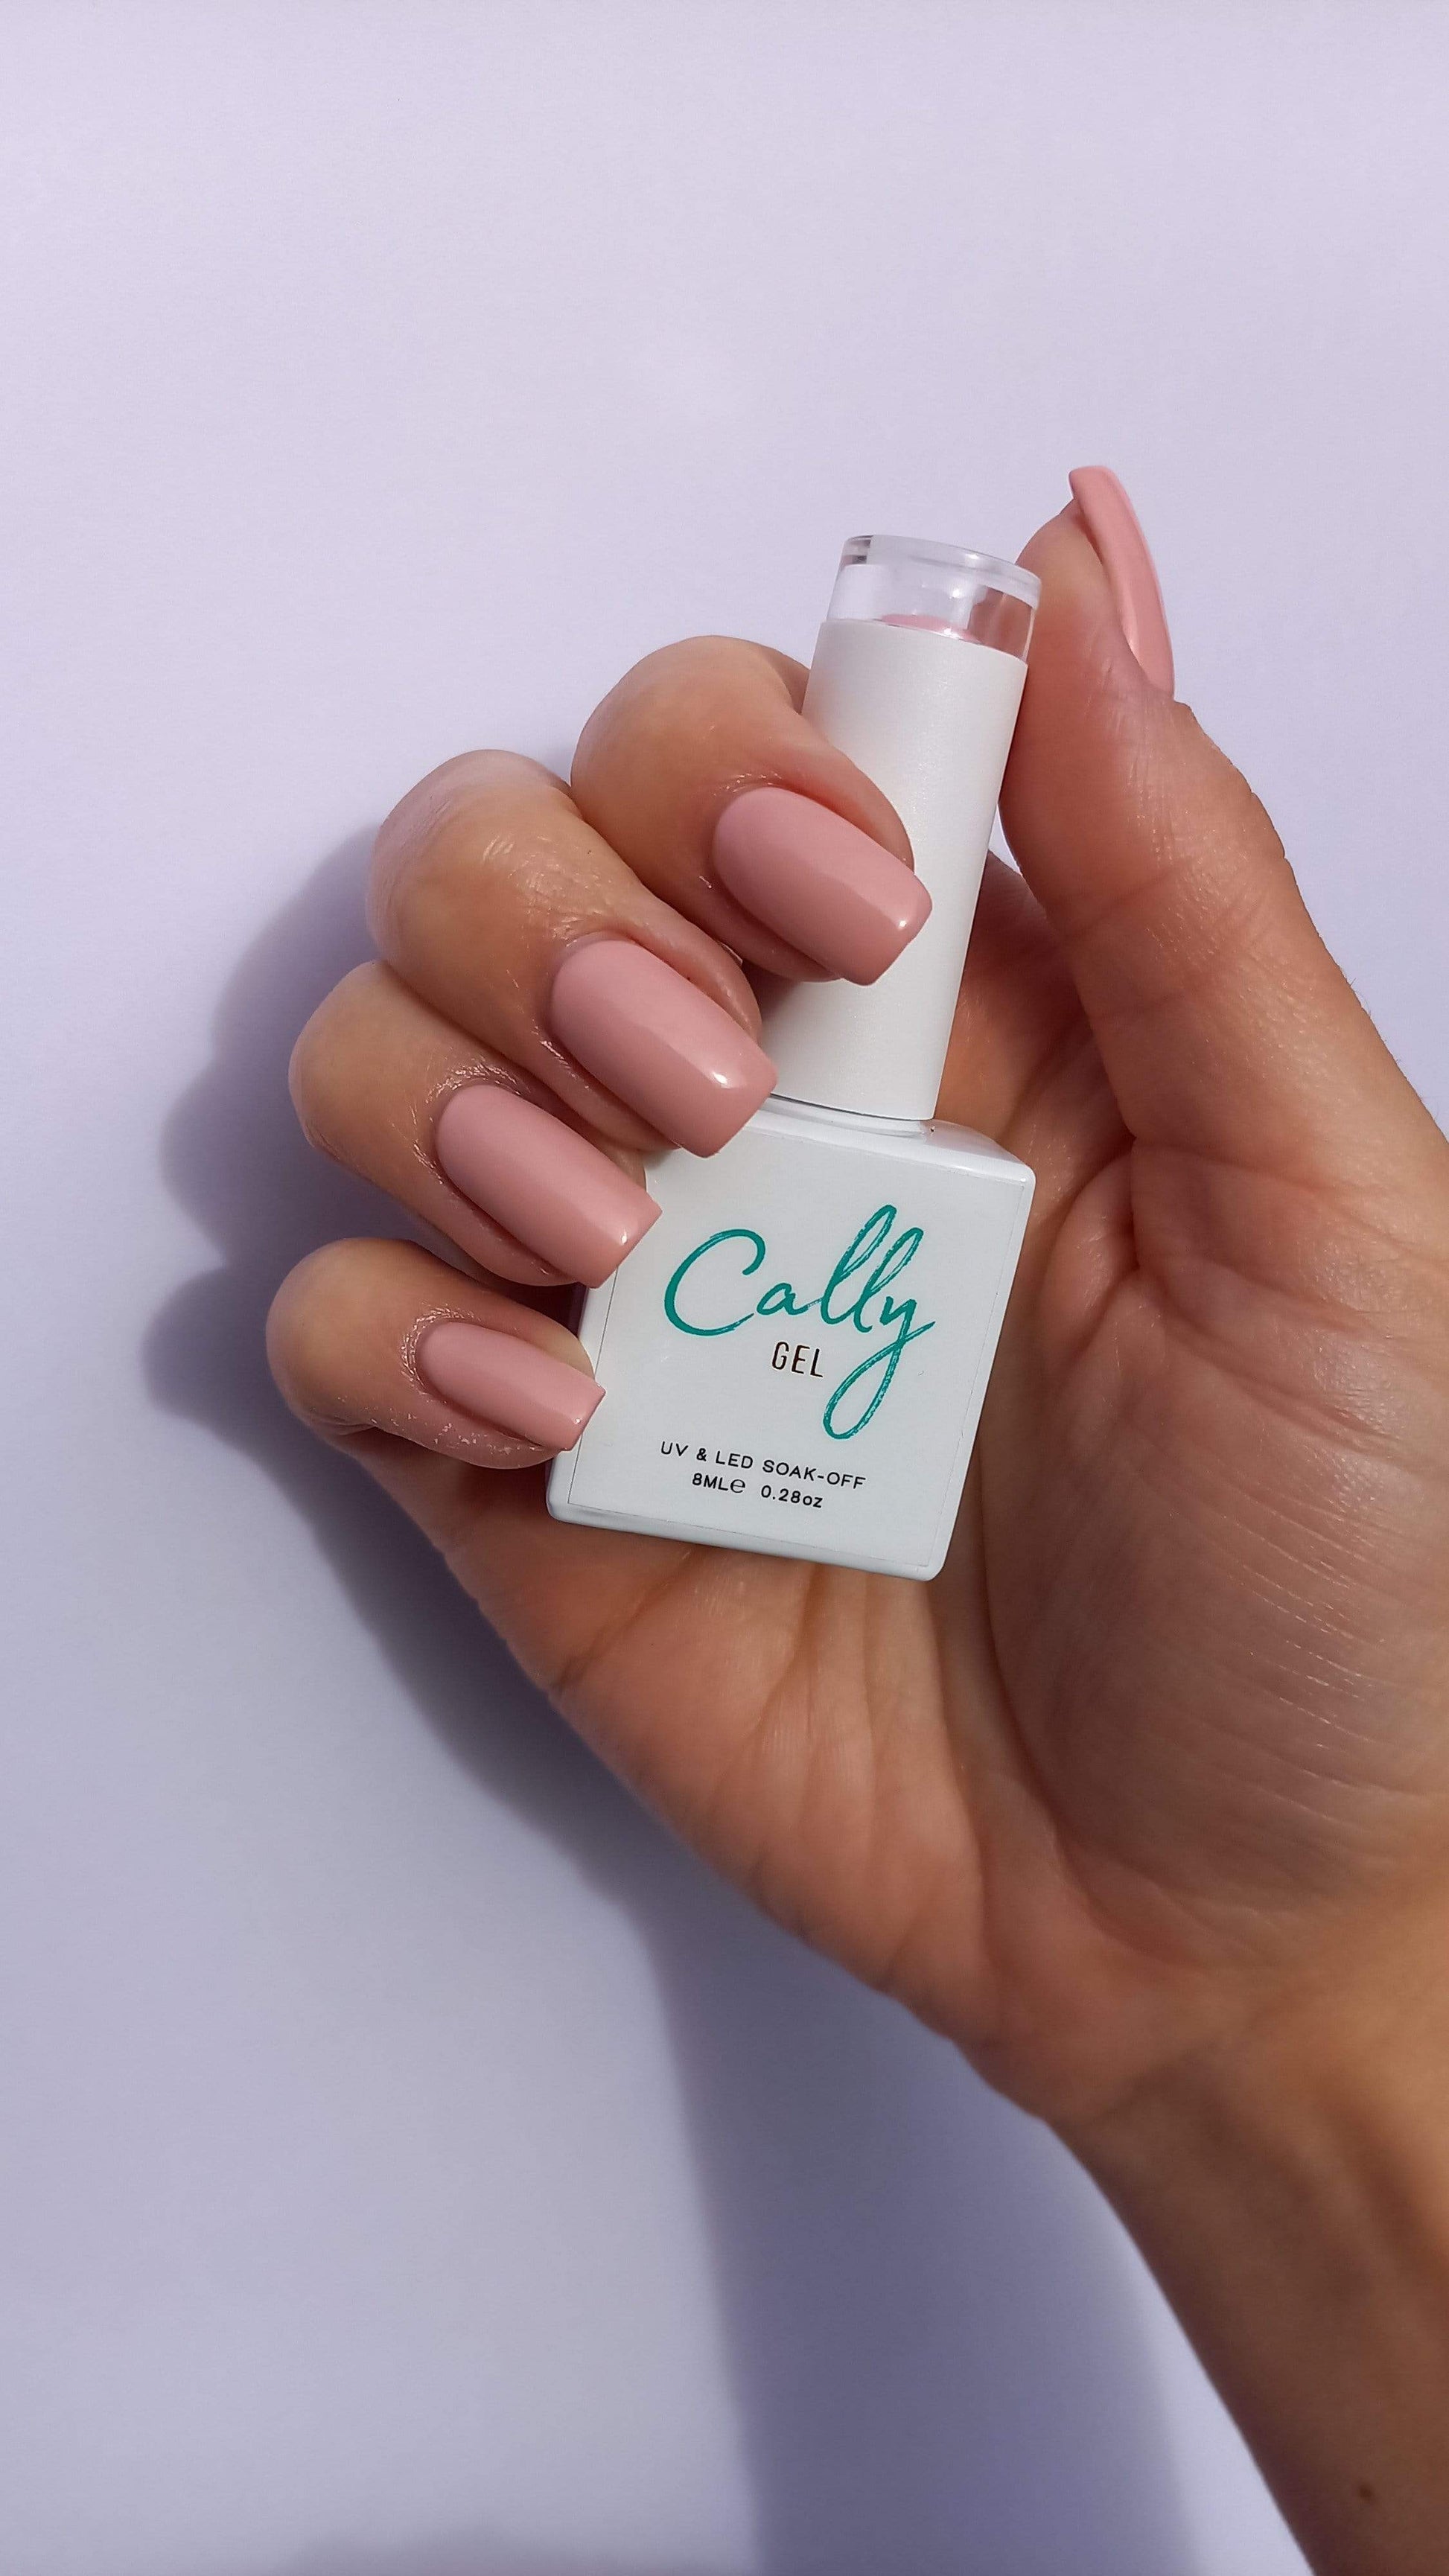 Manicured with Ballet Slippers Cally Gel Nail Polish and Bottle in Hand